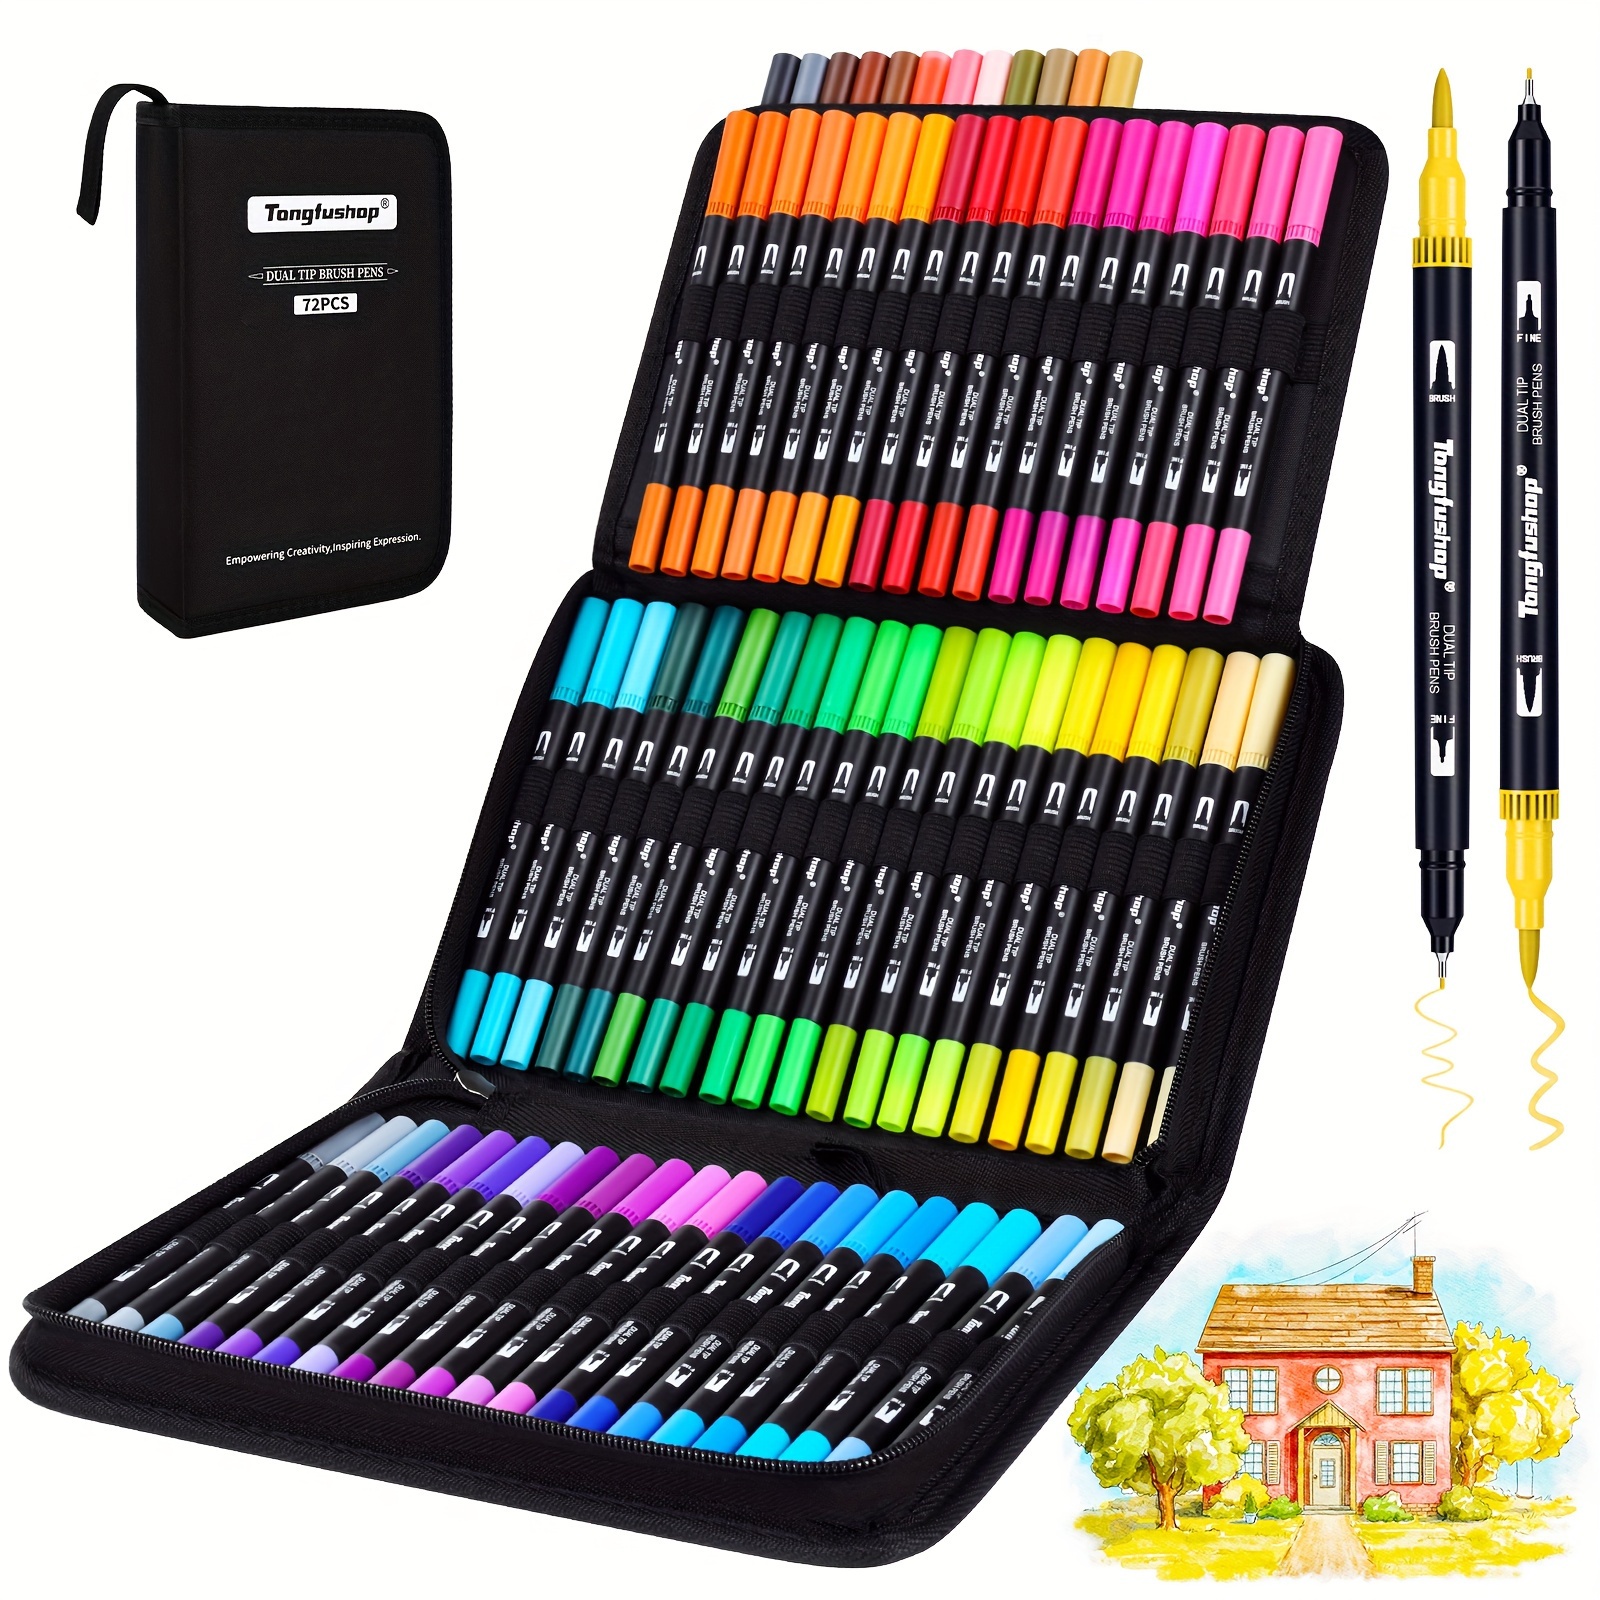 

Tongfushop 72 Colors Dual Tip Brush Markers, Brush And Fineliner Coloring Brush Pens Set, Art Pen For Adults Coloring Books, Christmas Cards Drawing, Lettering, Calligraphy, Journaling, Doodling